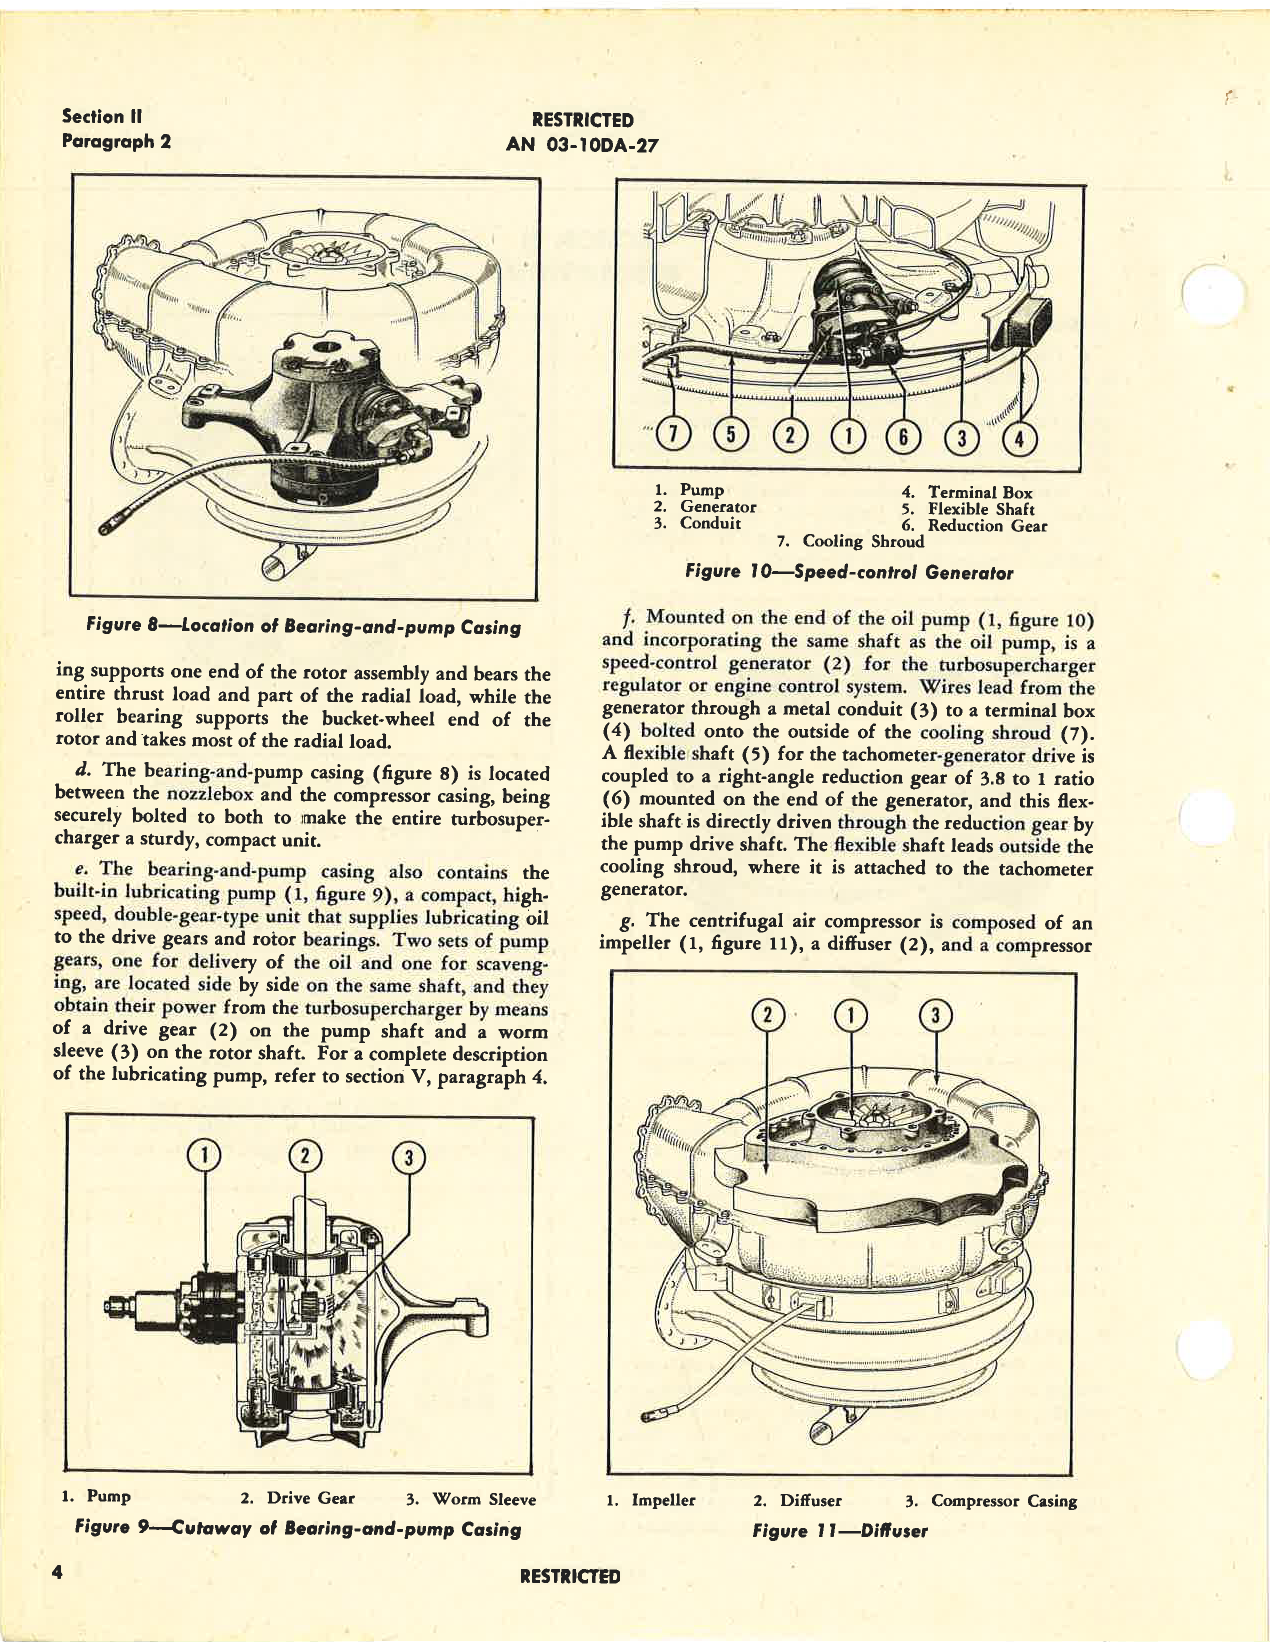 Sample page 8 from AirCorps Library document: Handbook of Instructions with Parts Catalog for Type CH-5 Turbosupercharger